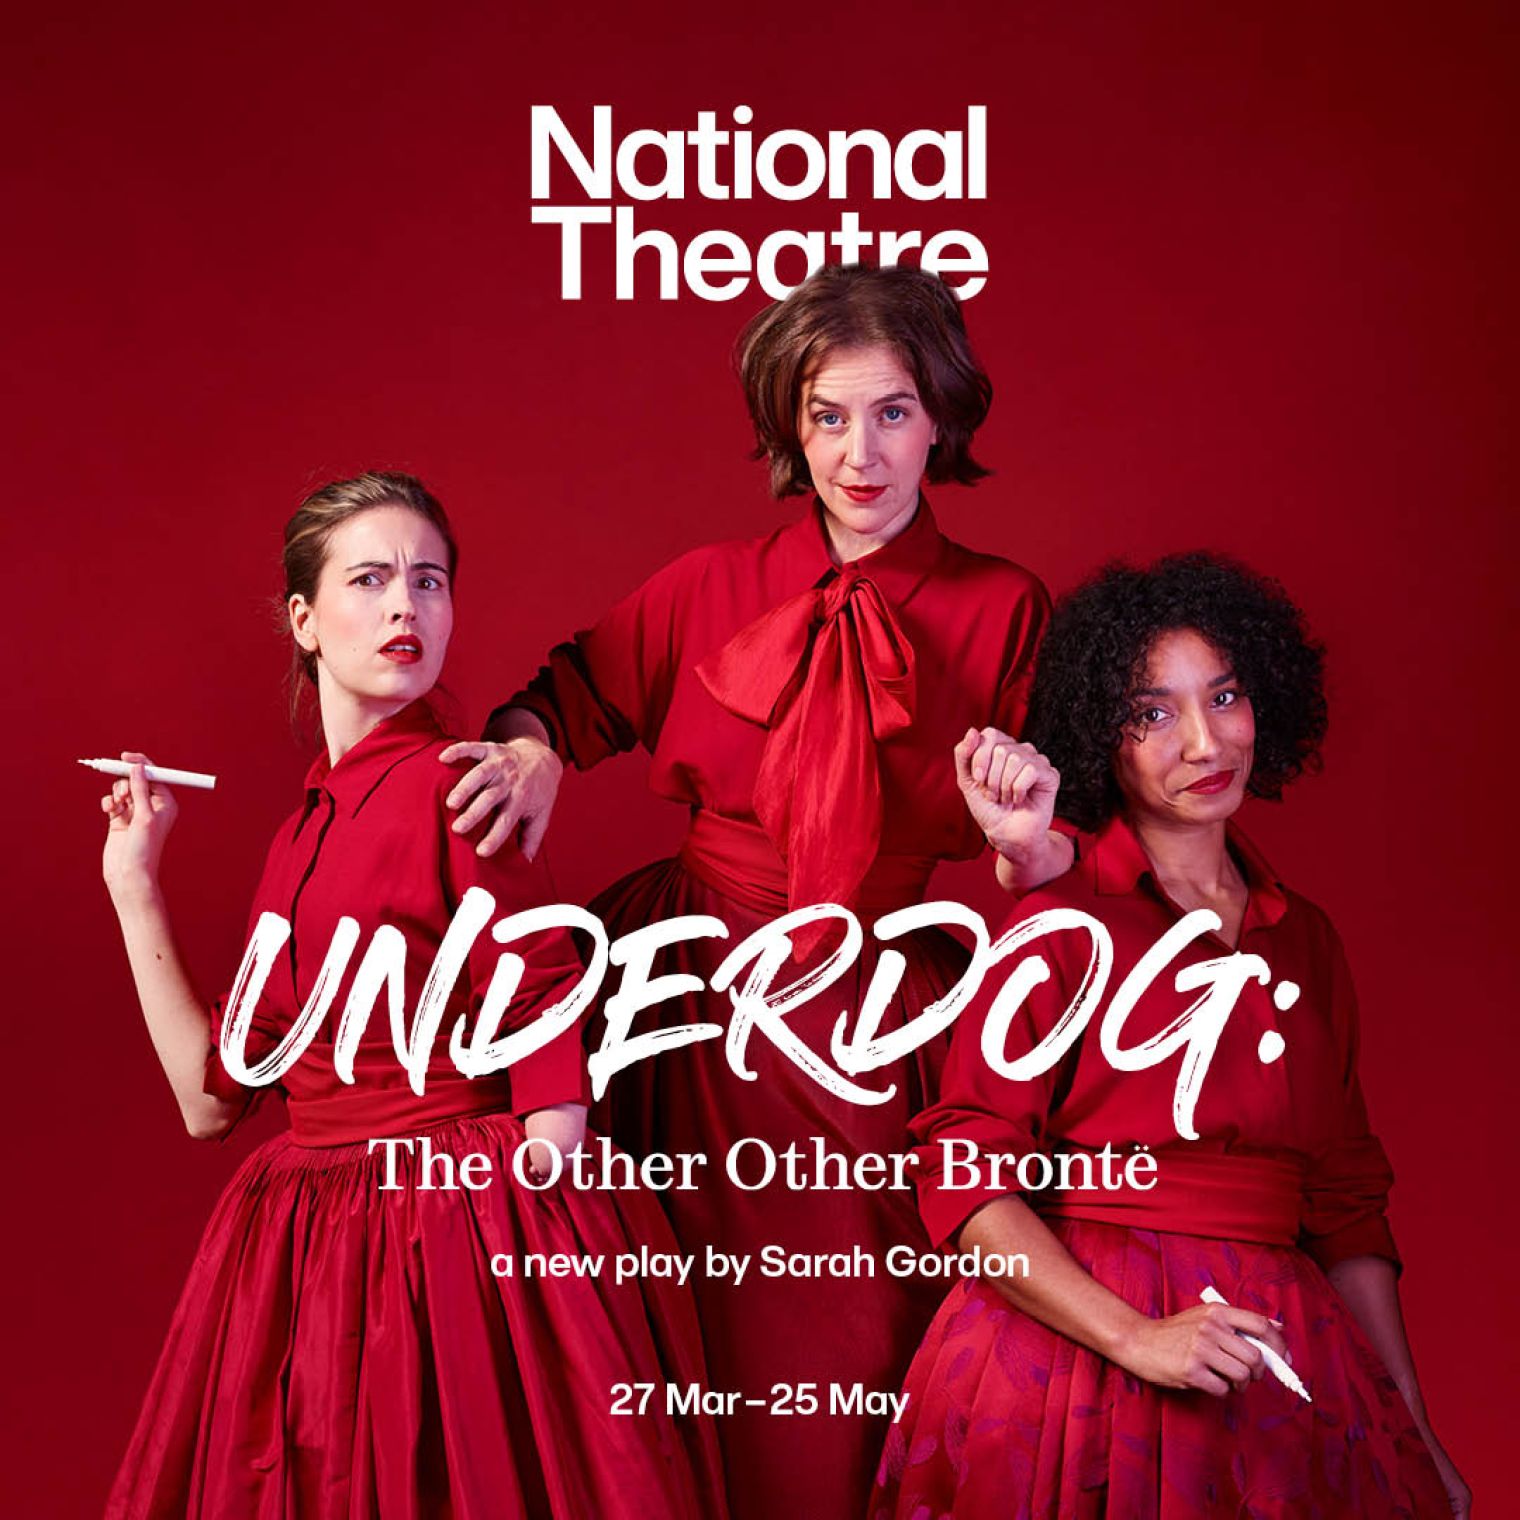 Gemma Whelan is to star as Charlotte Brontë in new play ‘Underdog: The Other Other Brontë’ which opens at London's National Theatre in March 2024